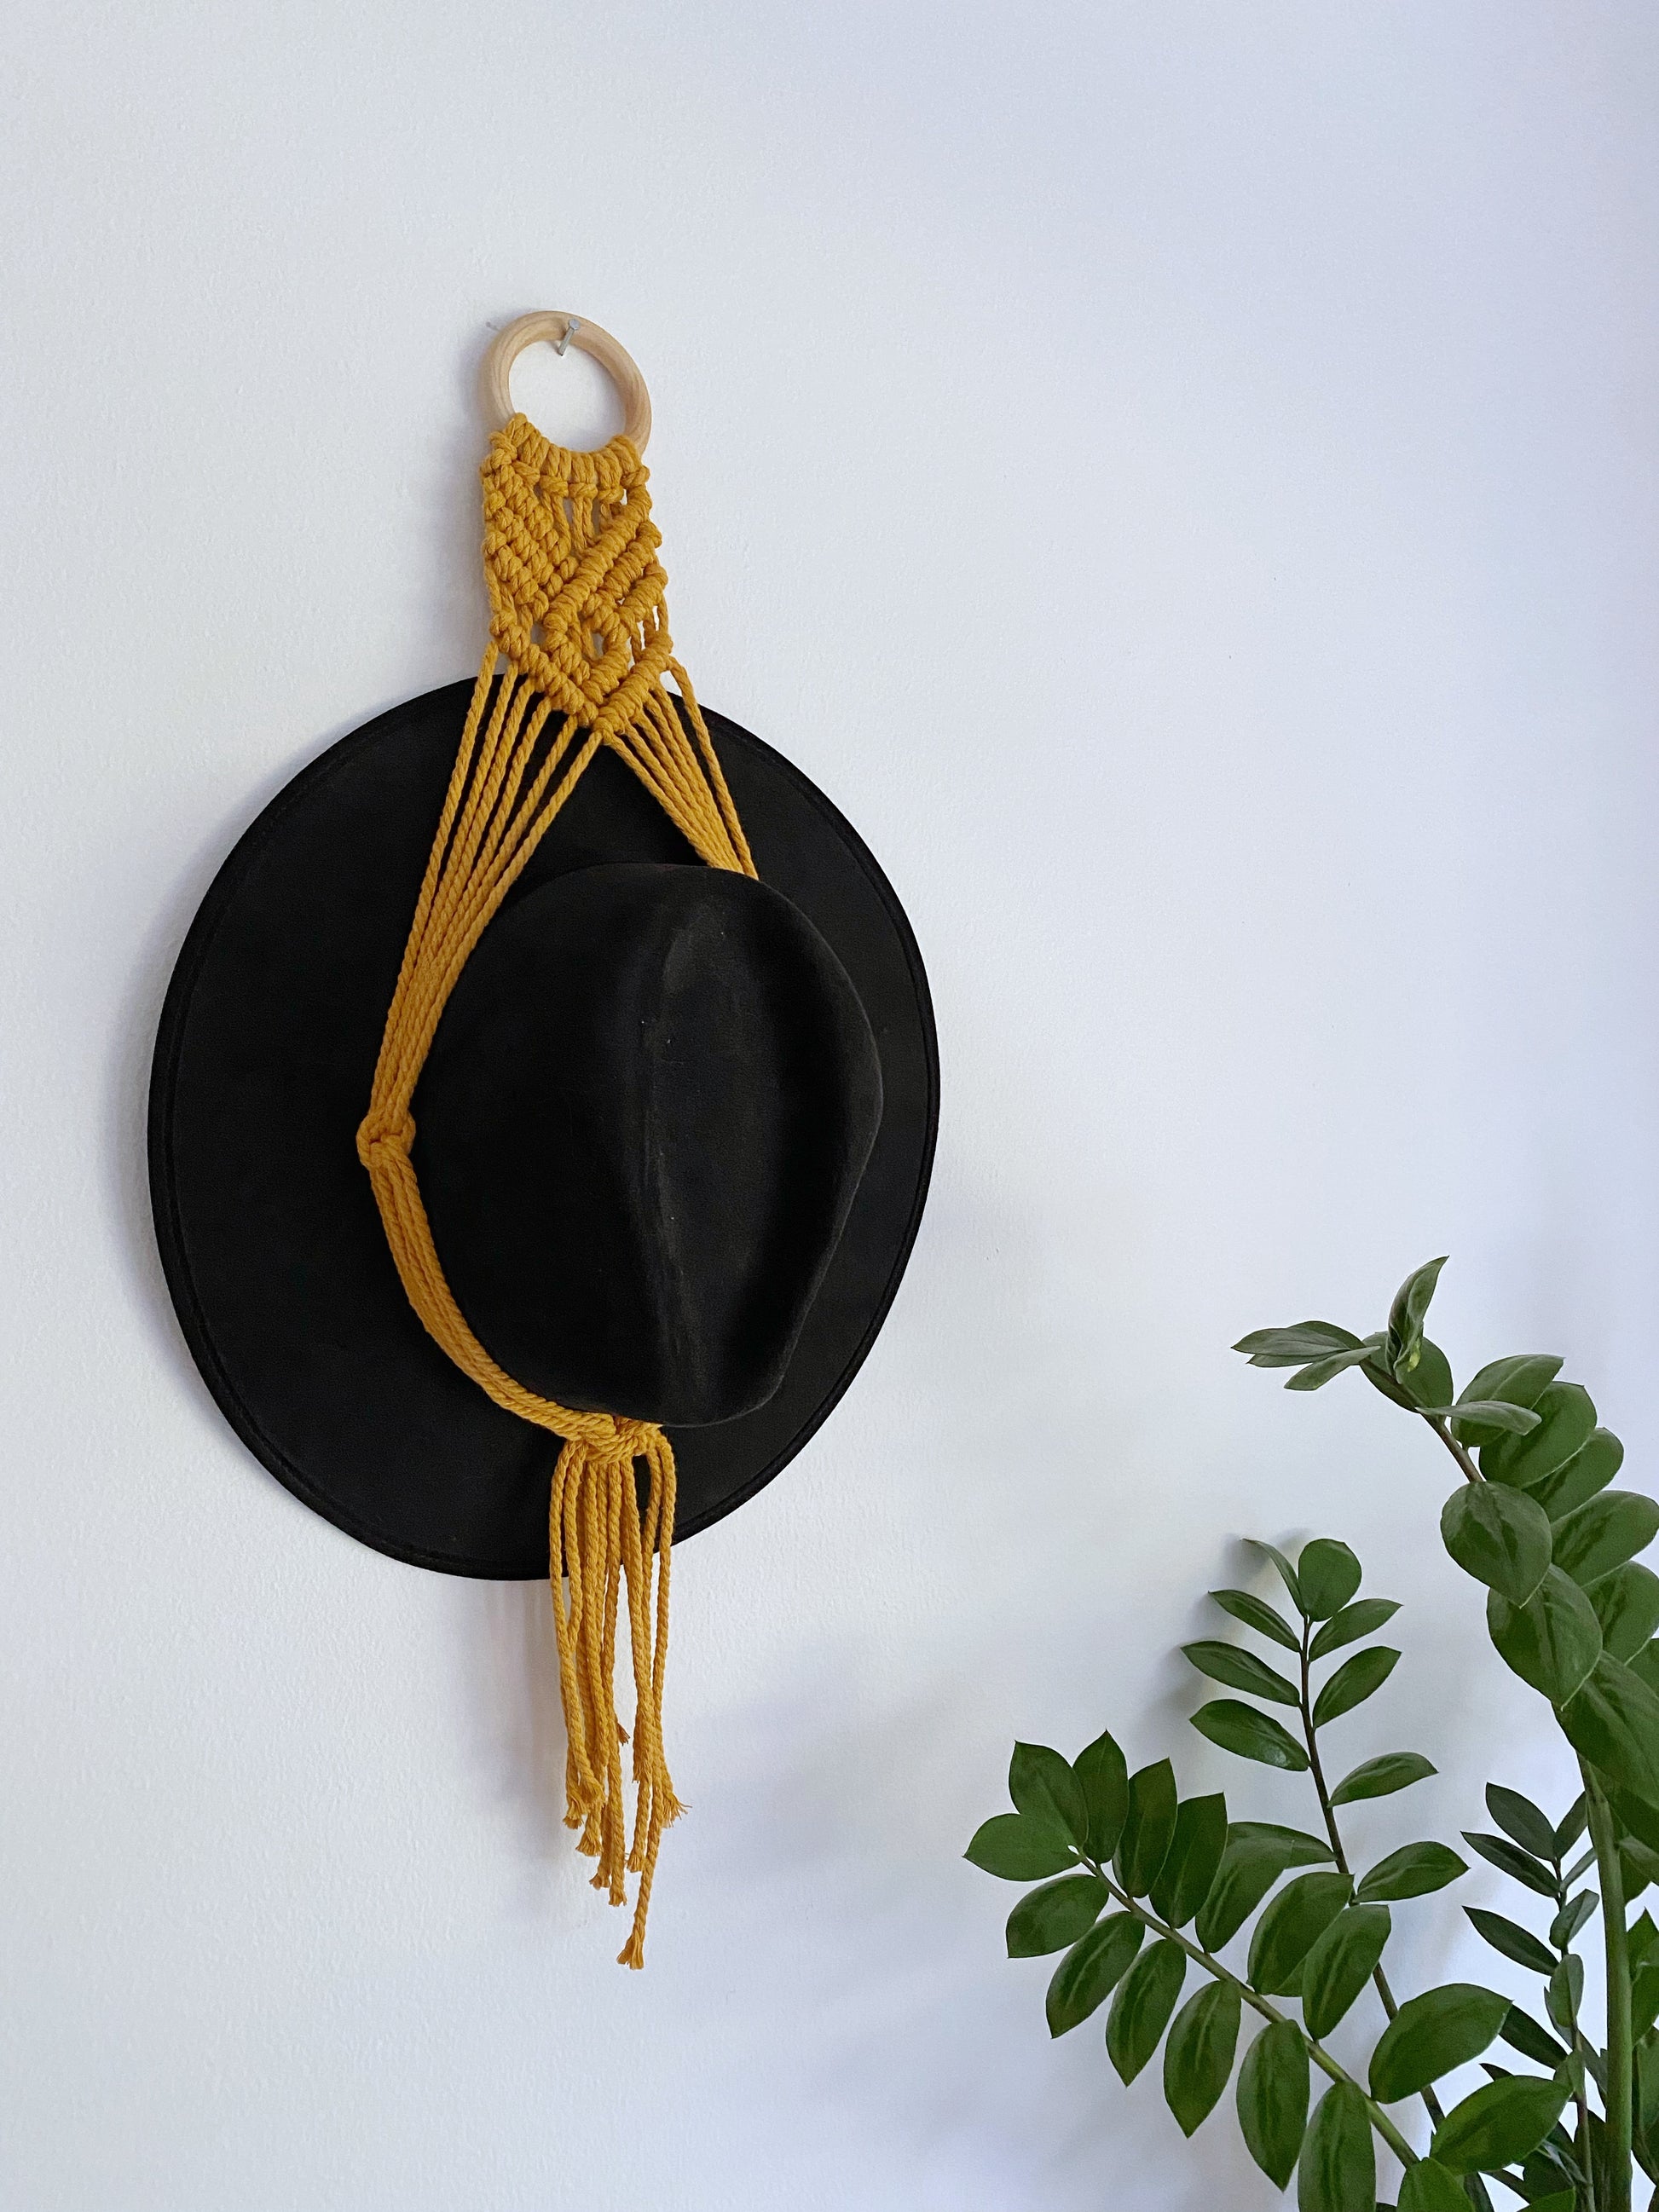 Show off your hat collection and decorate your home with a handmade macrame hat hanger! These hangers are lightweight and easy to hang, and designed to fit a variety of hat sizes. They also make for a unique housewarming gift!